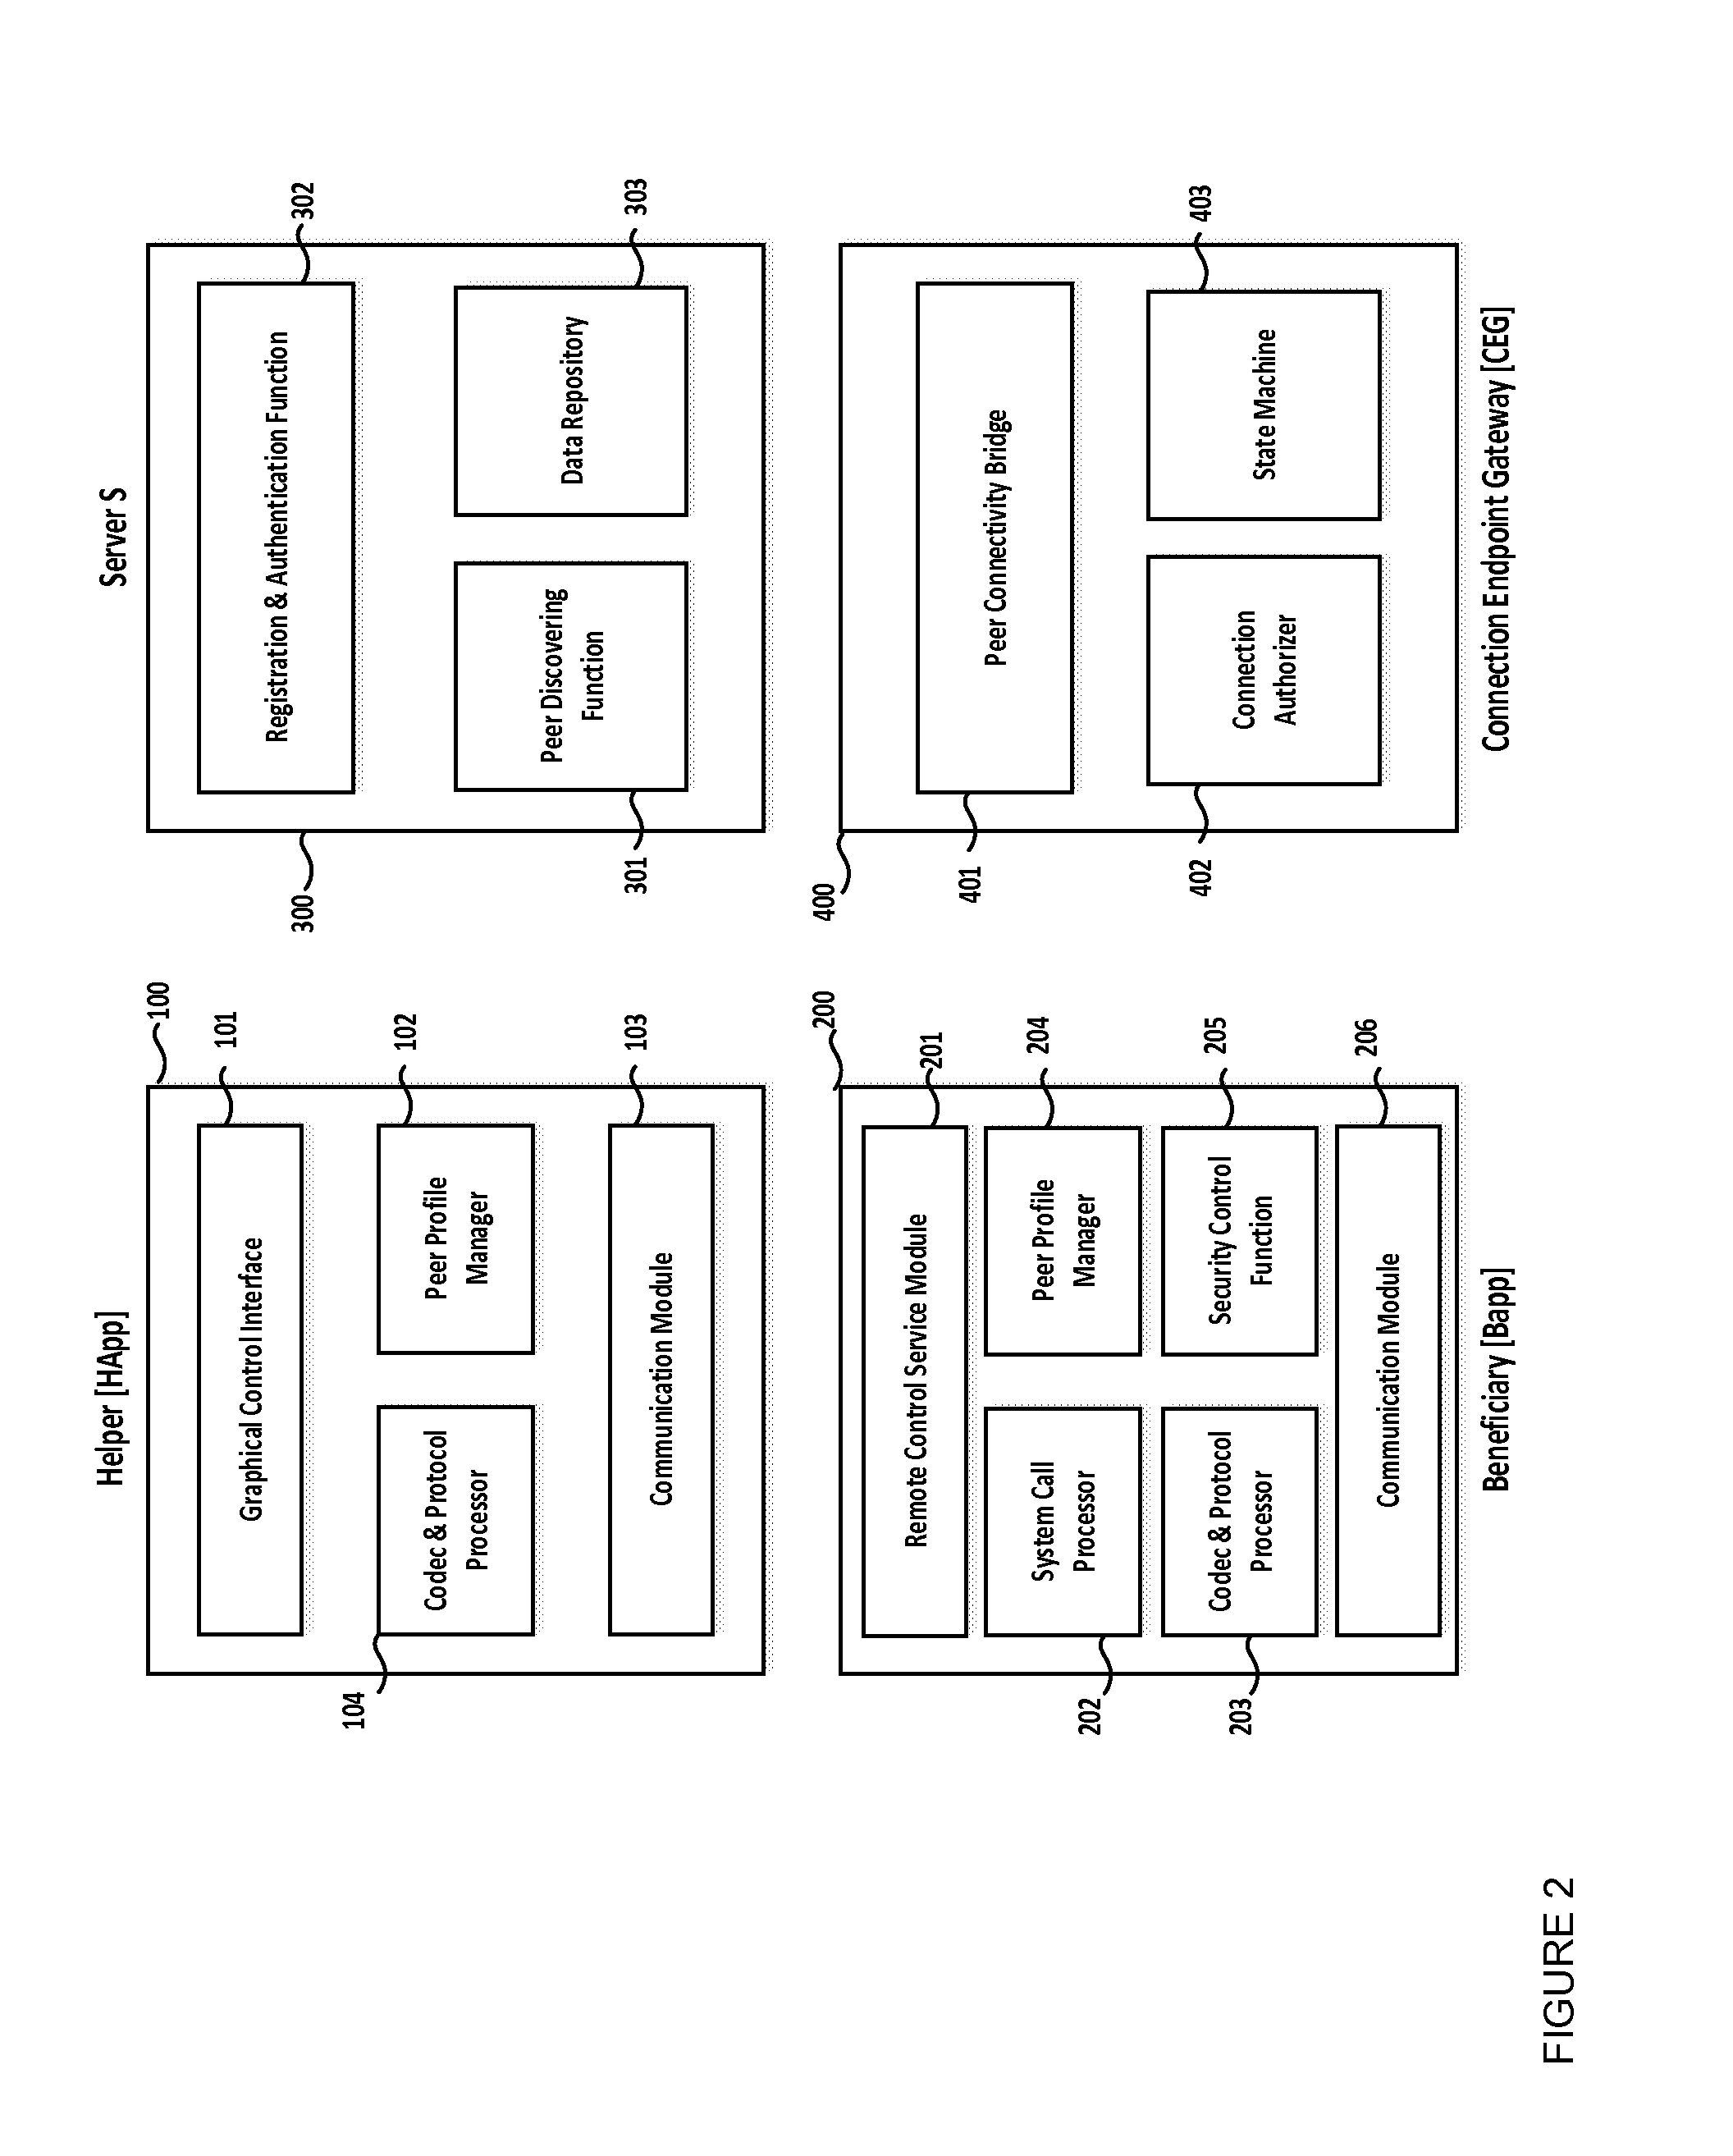 Peer to peer remote control method between one or more mobile devices